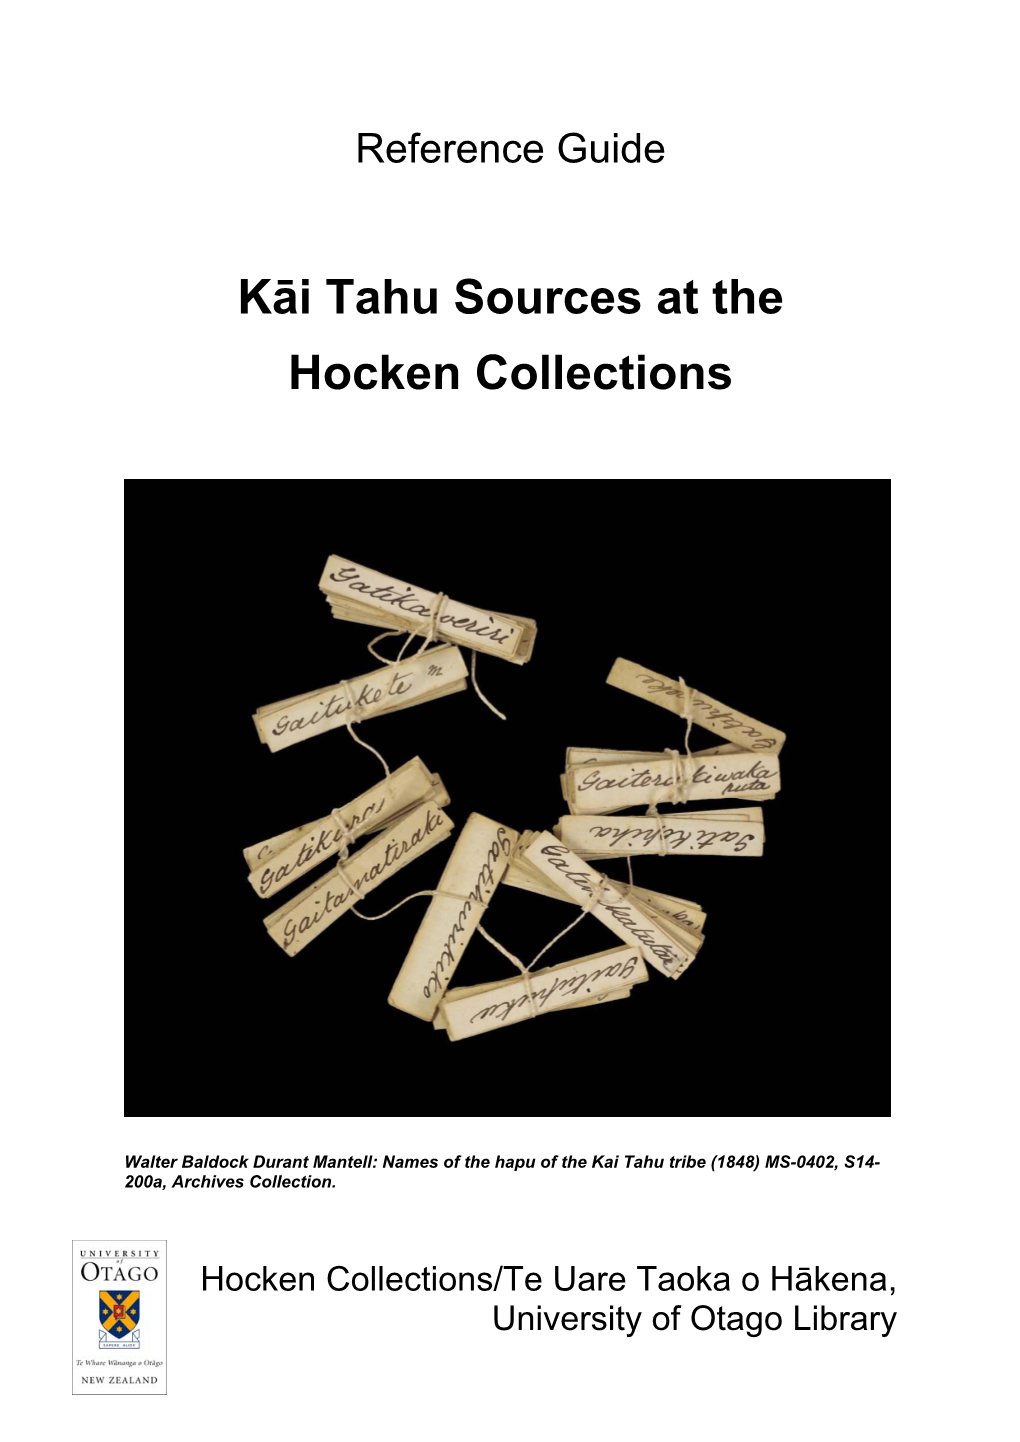 Kāi Tahu Sources at the Hocken Collections